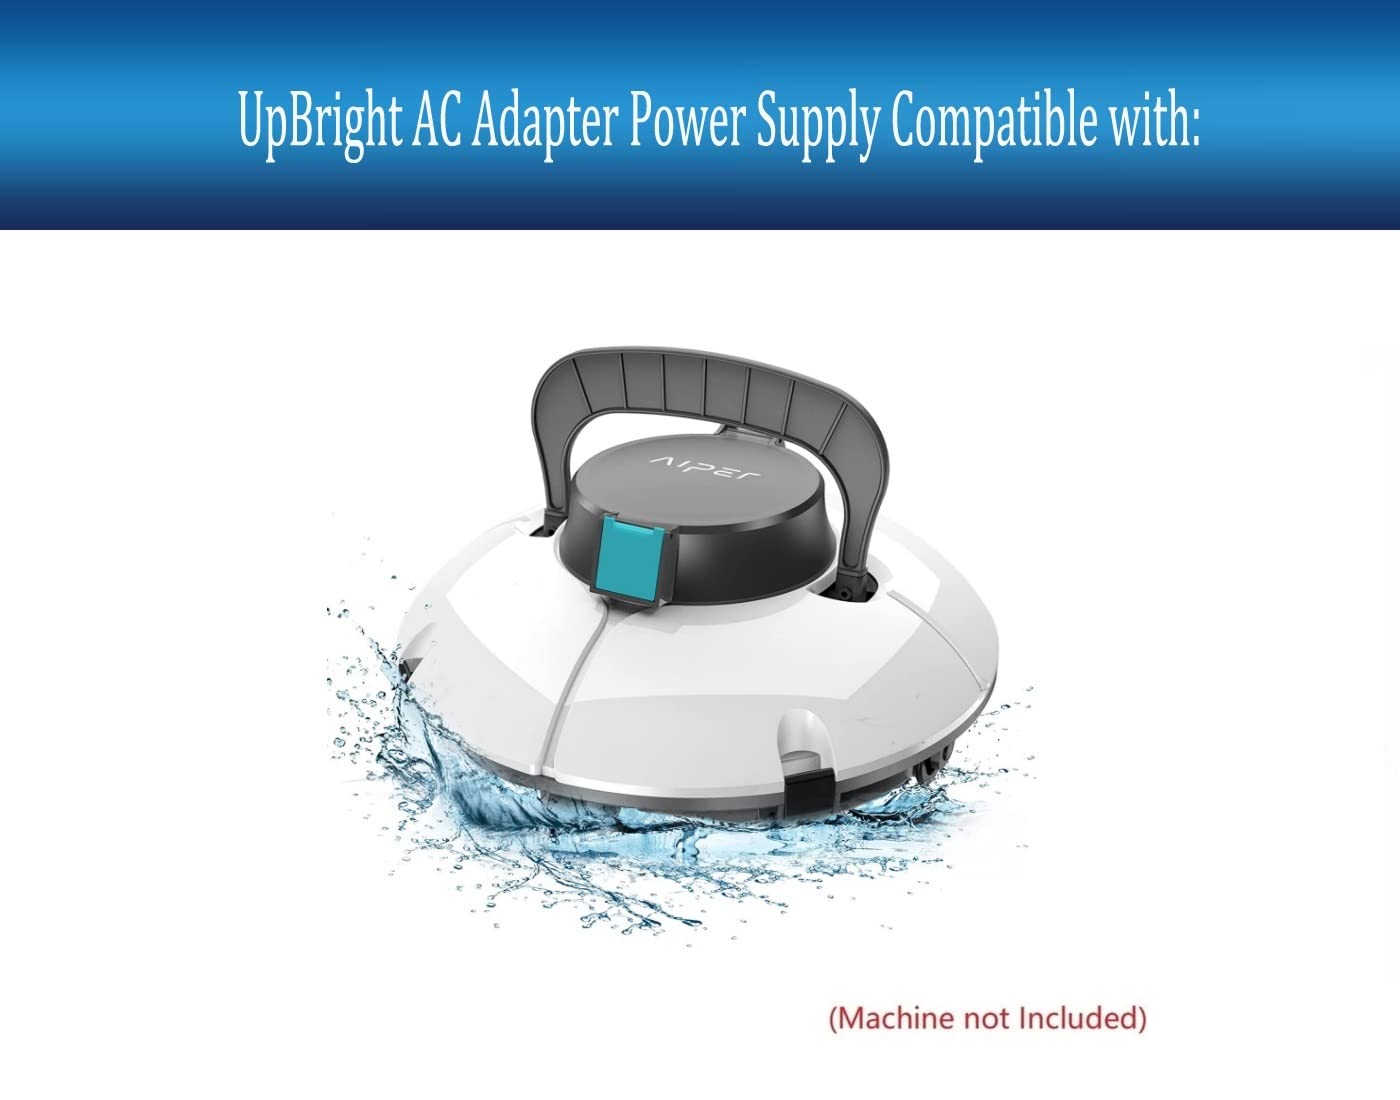 UpBright 2-Pin 12.6V 1A AC/DC Adapter Compatible with AIPER SMART Seagull 600 HJ1102 P1111 Cordless Automatic Robotic Pool Vacuum Cleaner 2600mAh Li-ion Battery Sunshine XSD-1261000NUSD Power Charger